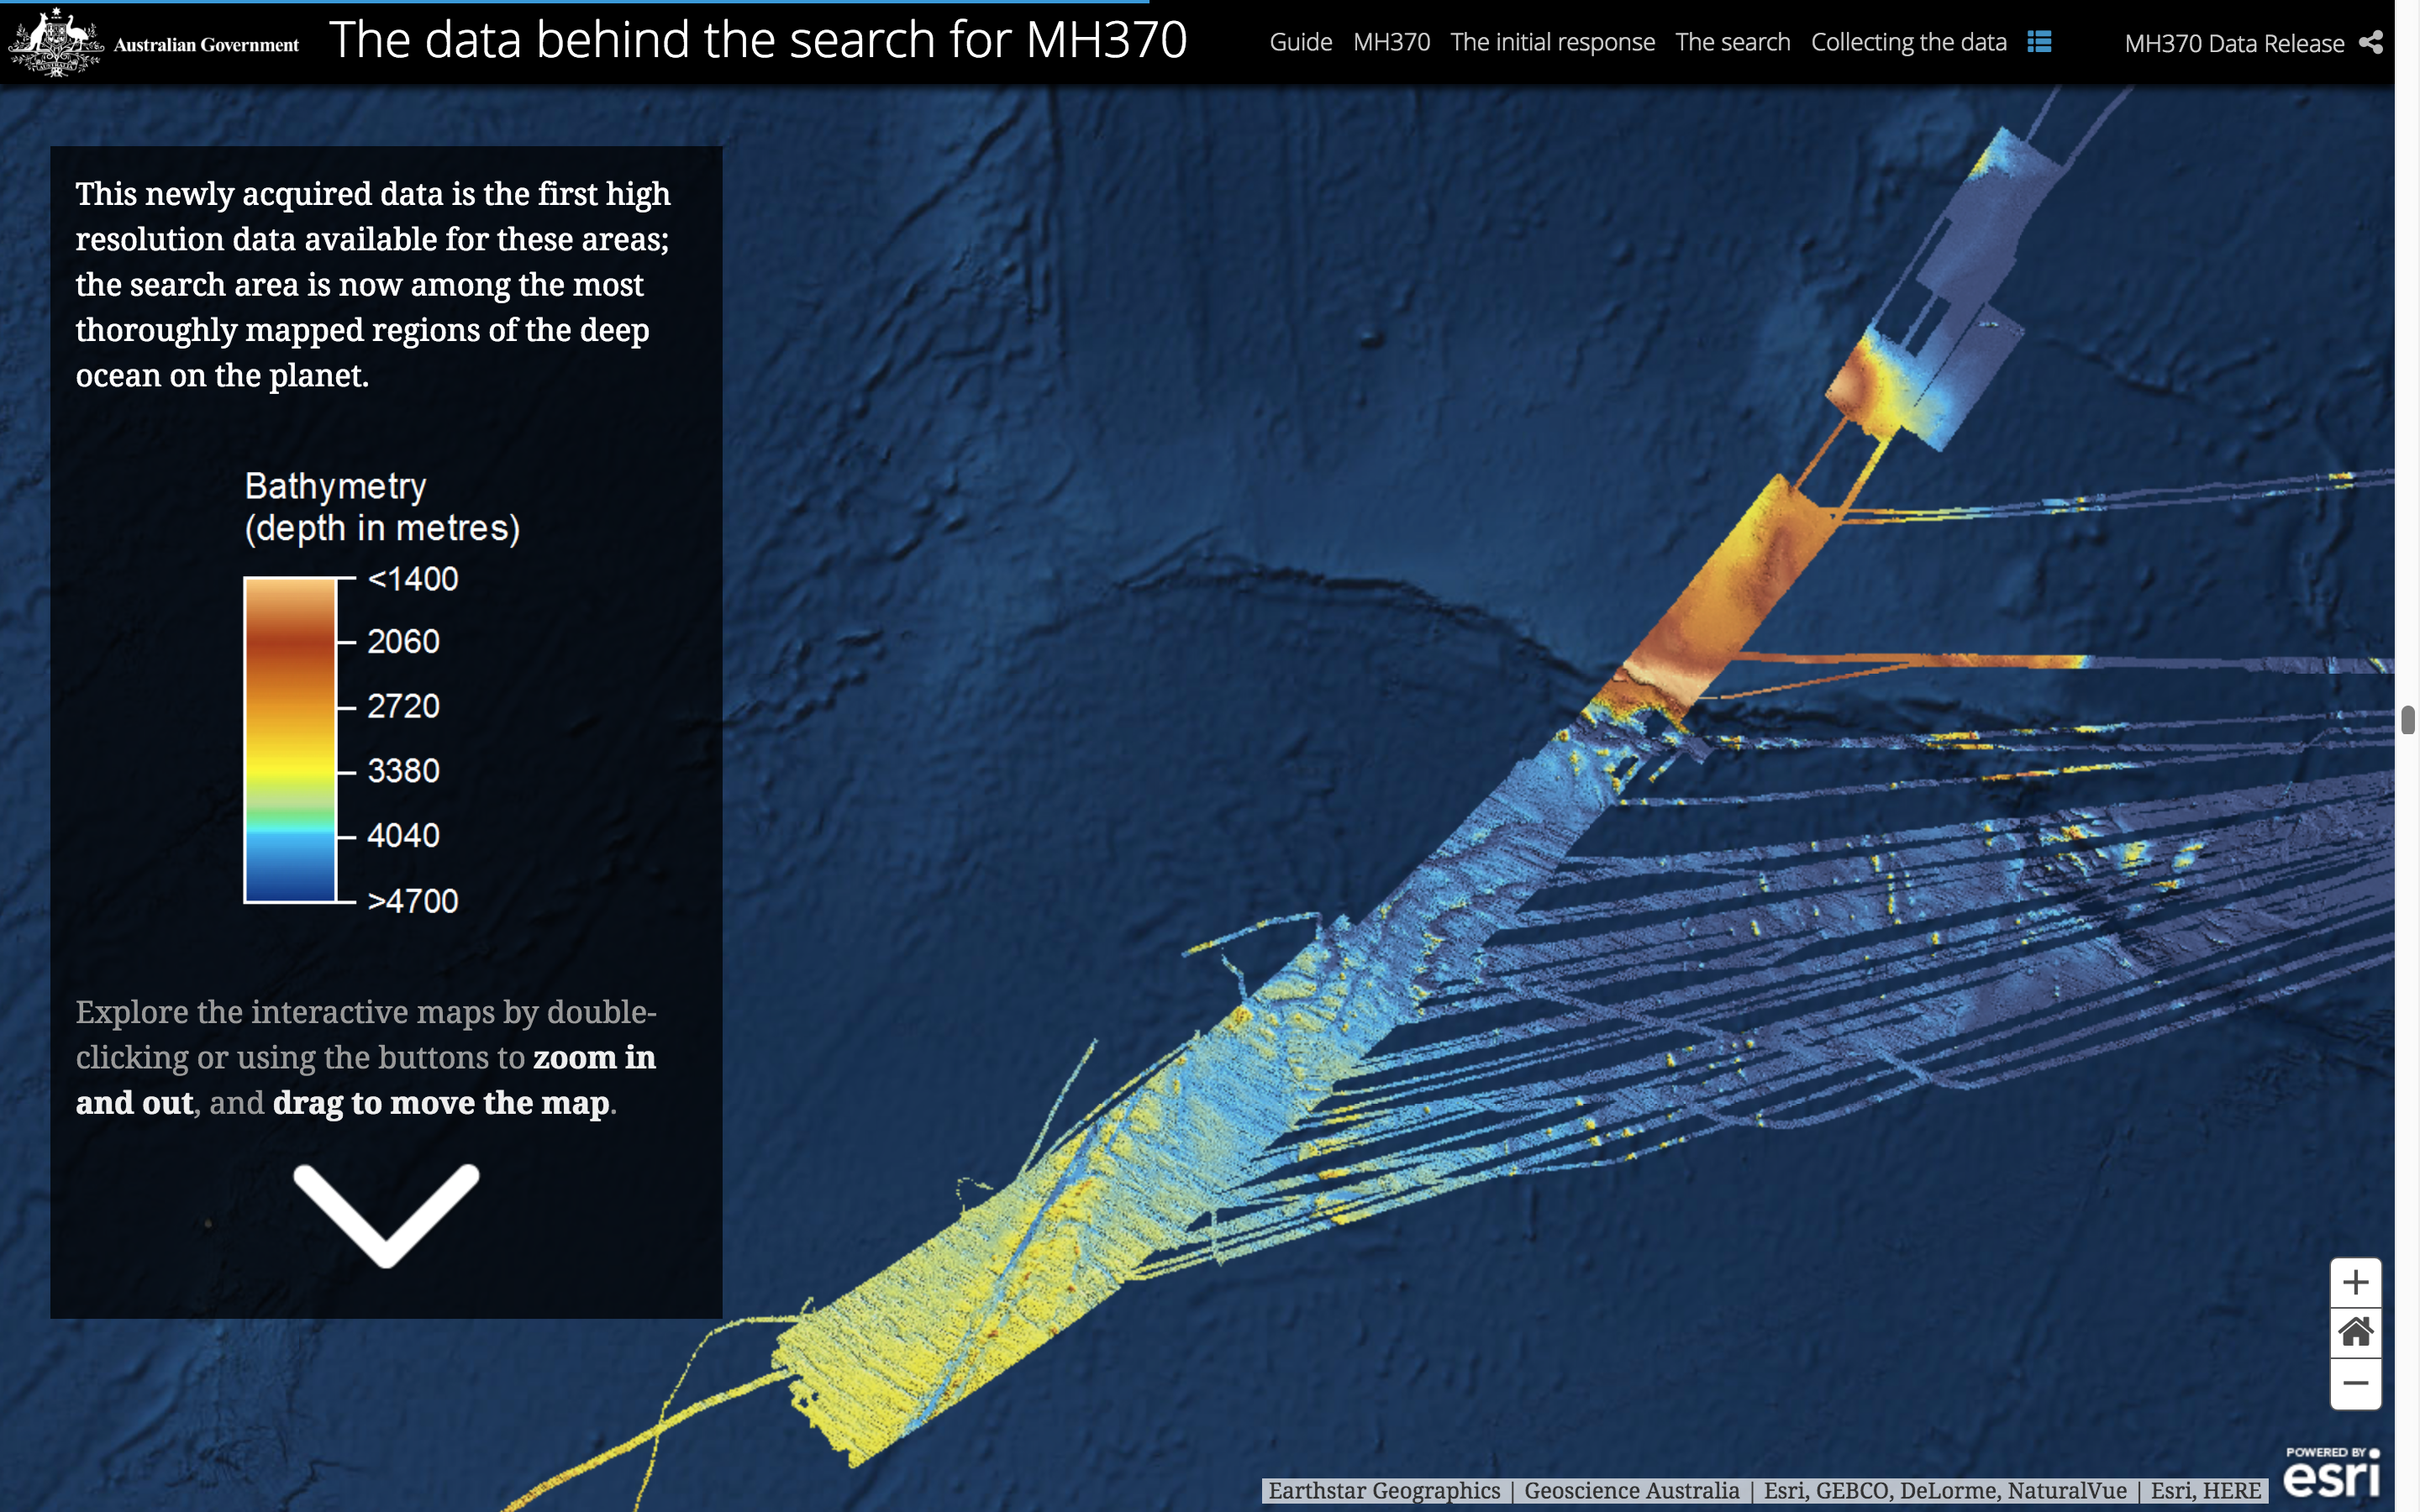 ATSB MH370 Mapping